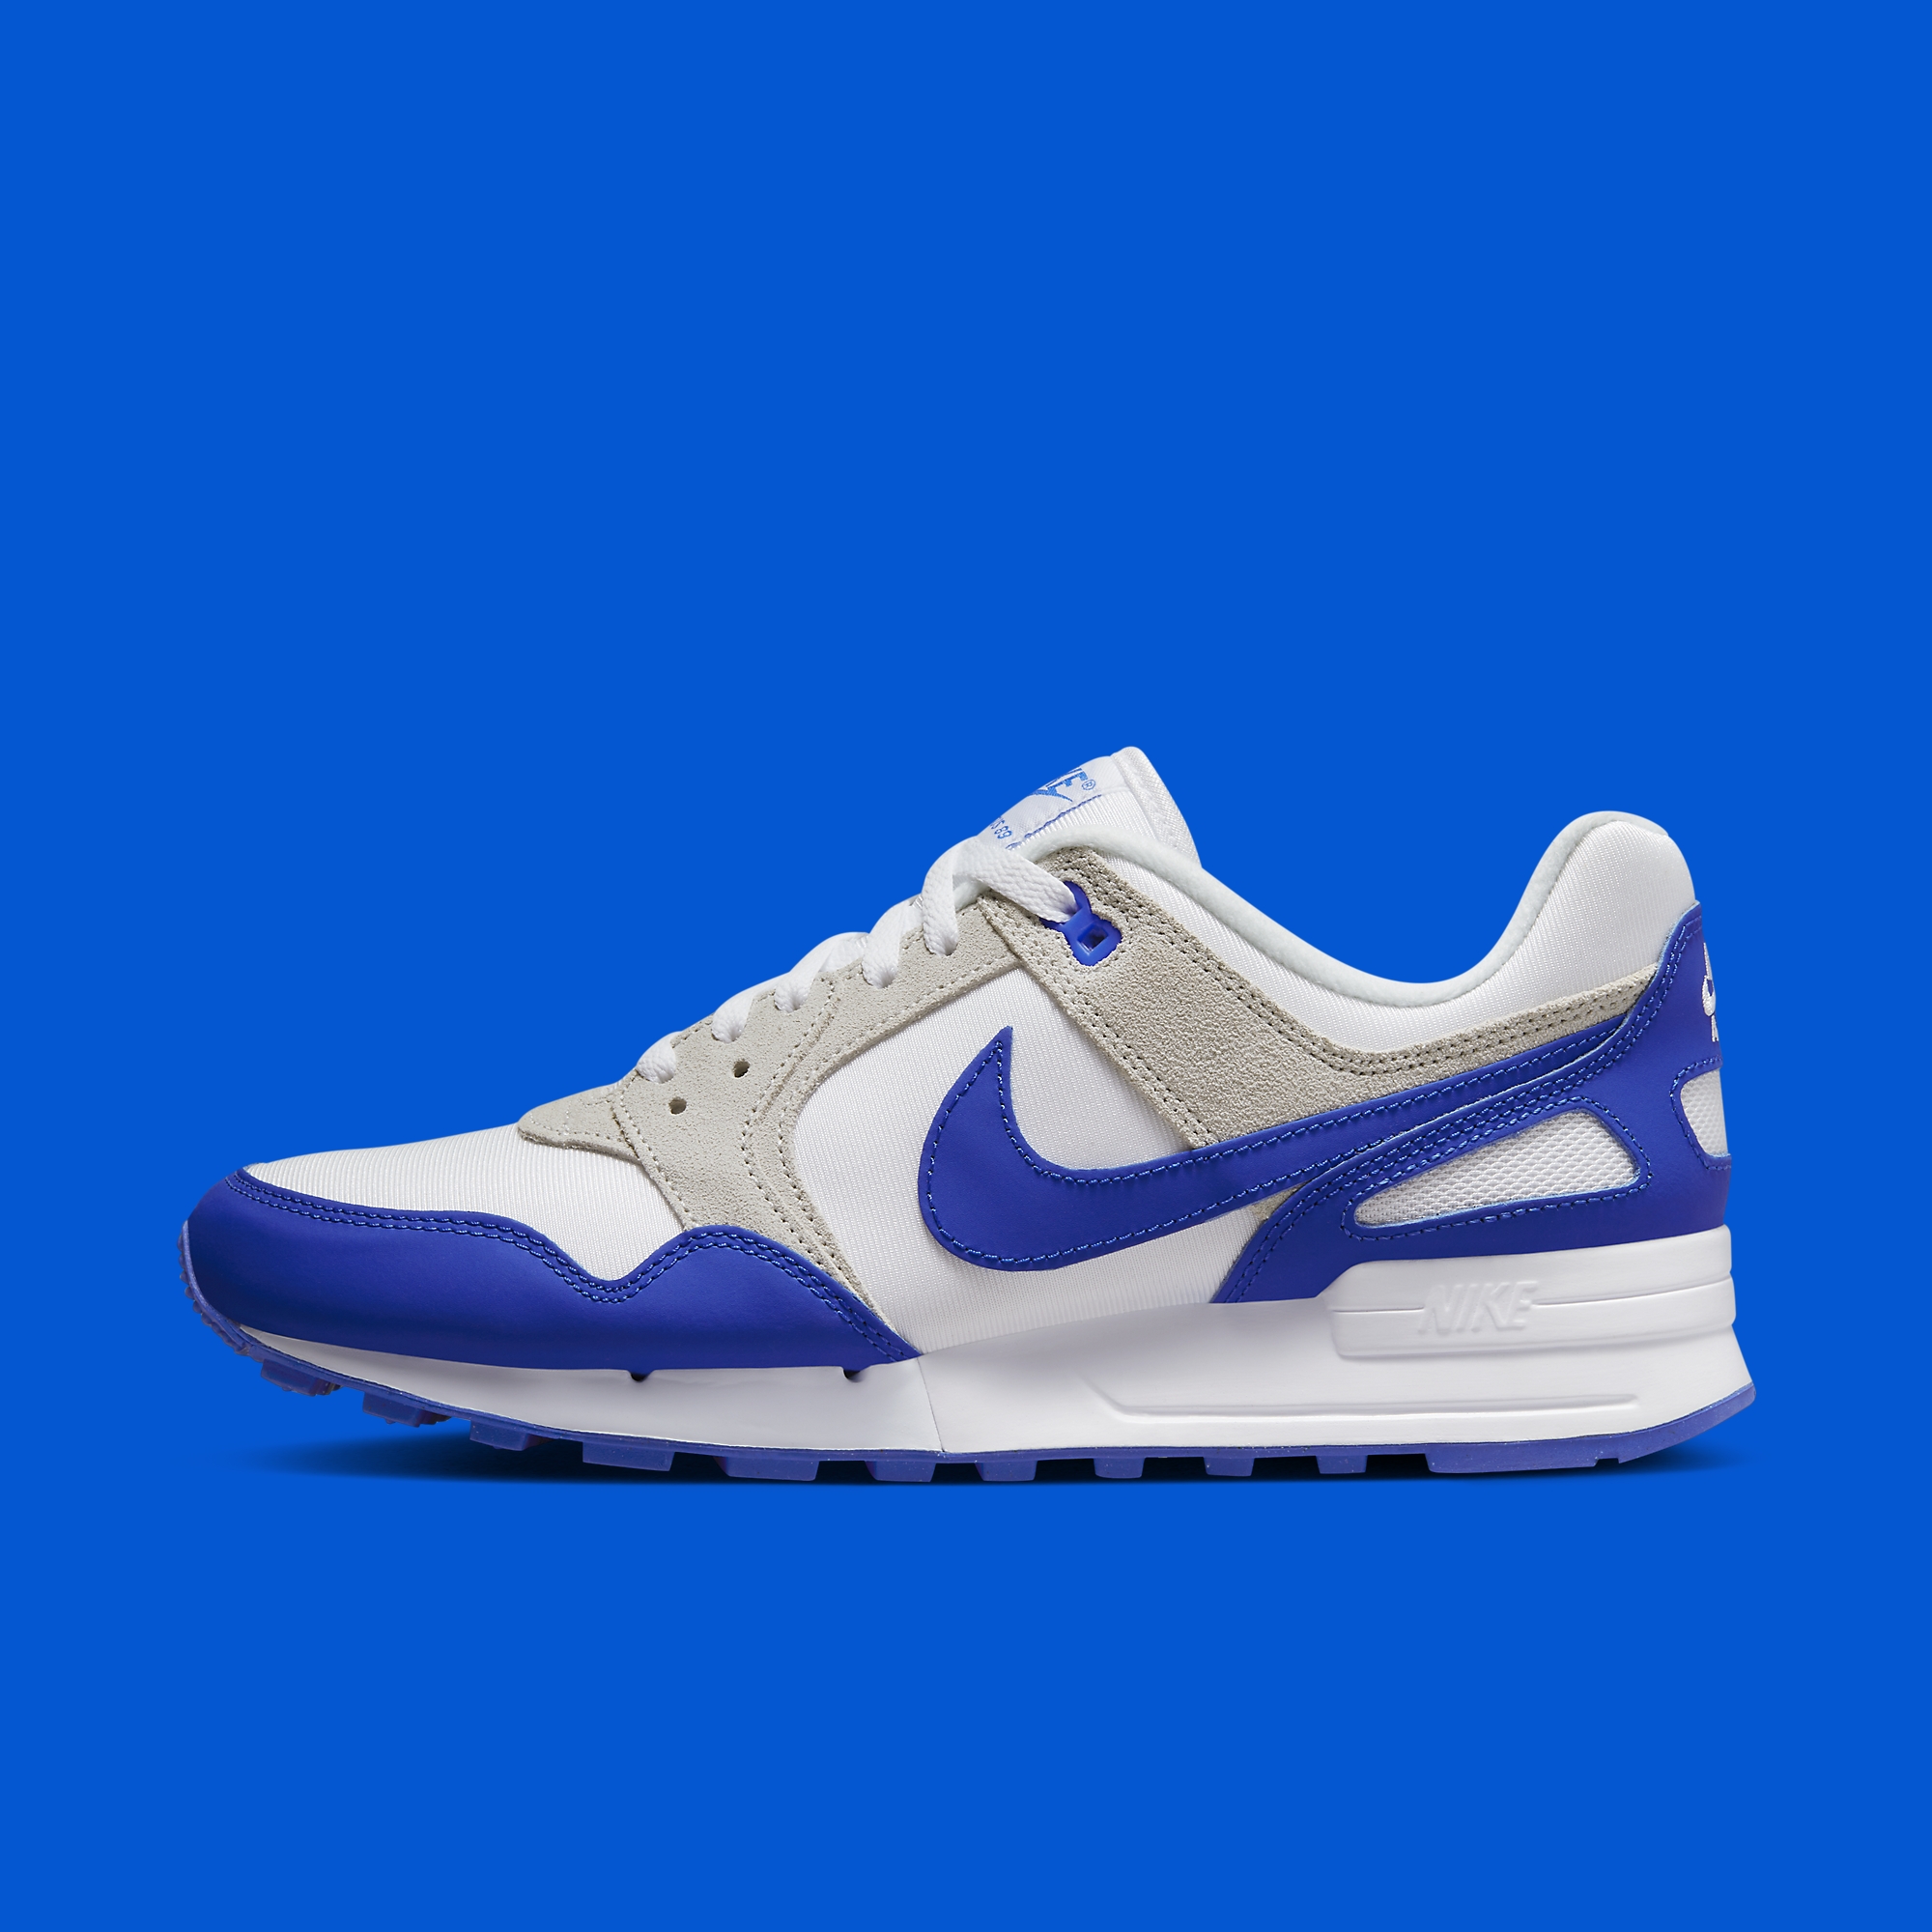 Sneaker News Twitter: "87 meets 89 in this upcoming Air Pegasus Retro https://t.co/cgXMlJYzbd" / Twitter